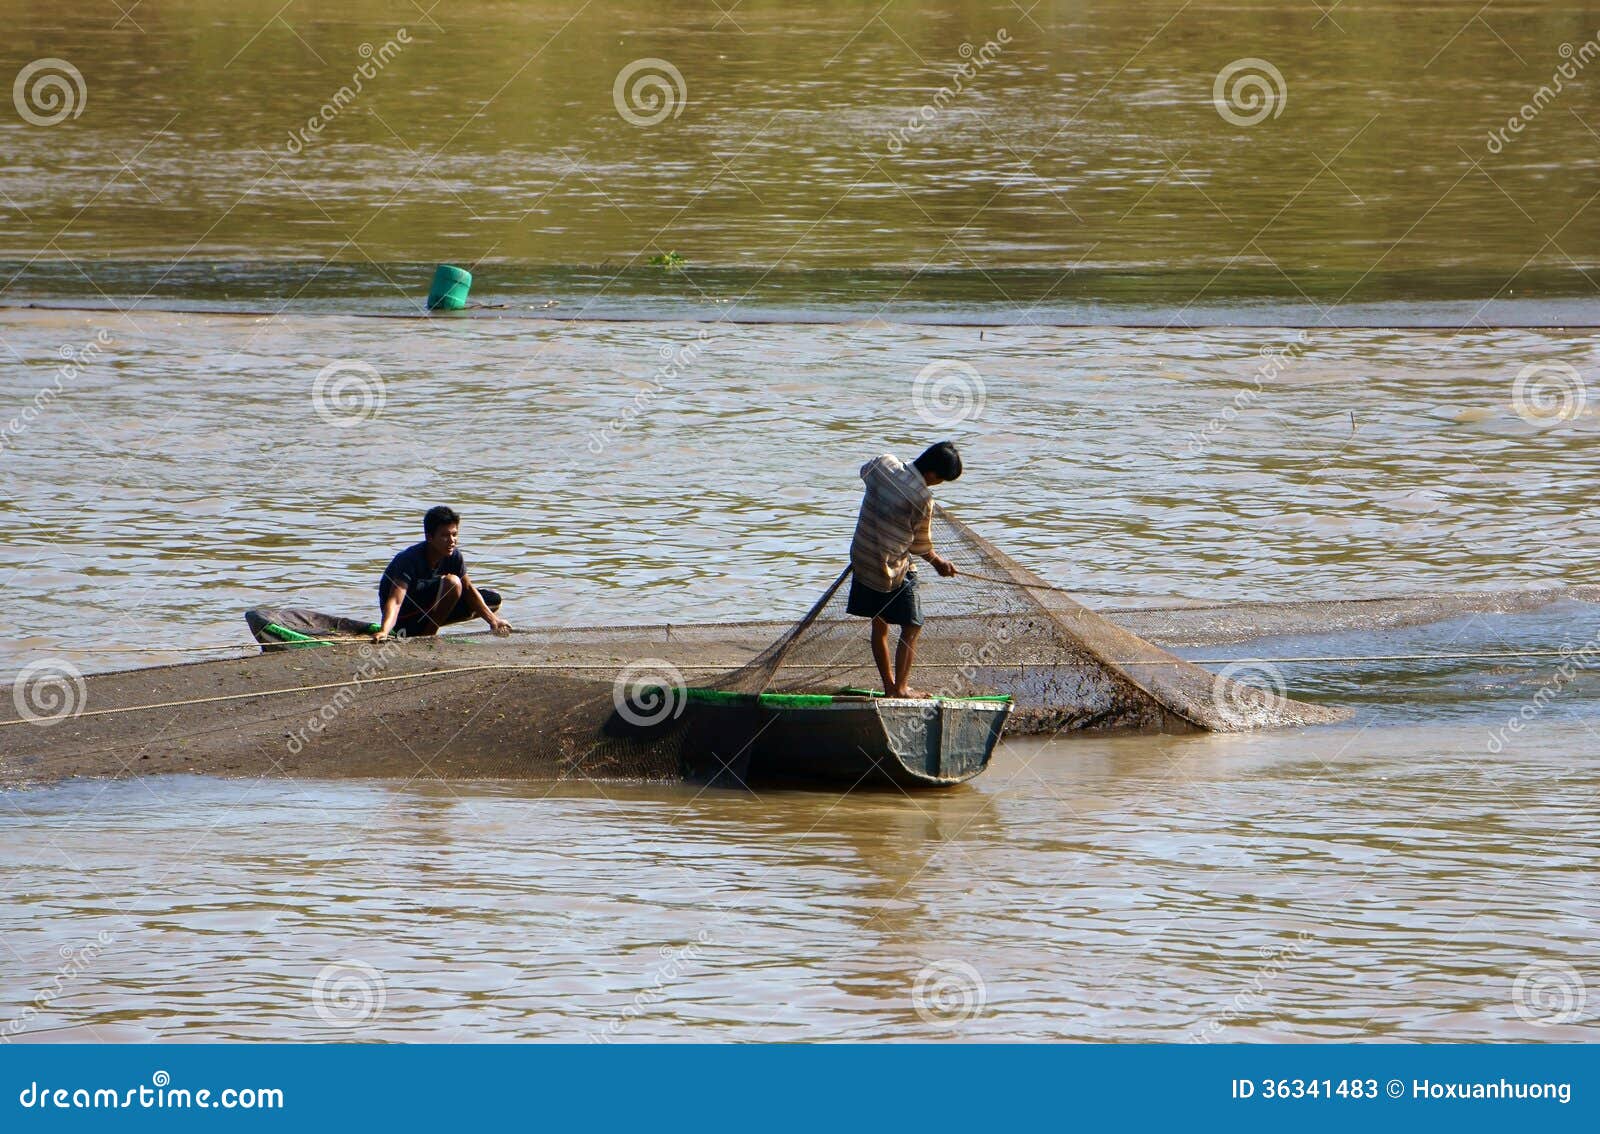 https://thumbs.dreamstime.com/z/two-fisherman-catching-fish-net-dong-thap-viet-nam-nov-do-fishing-river-spread-to-catch-then-pull-beat-36341483.jpg